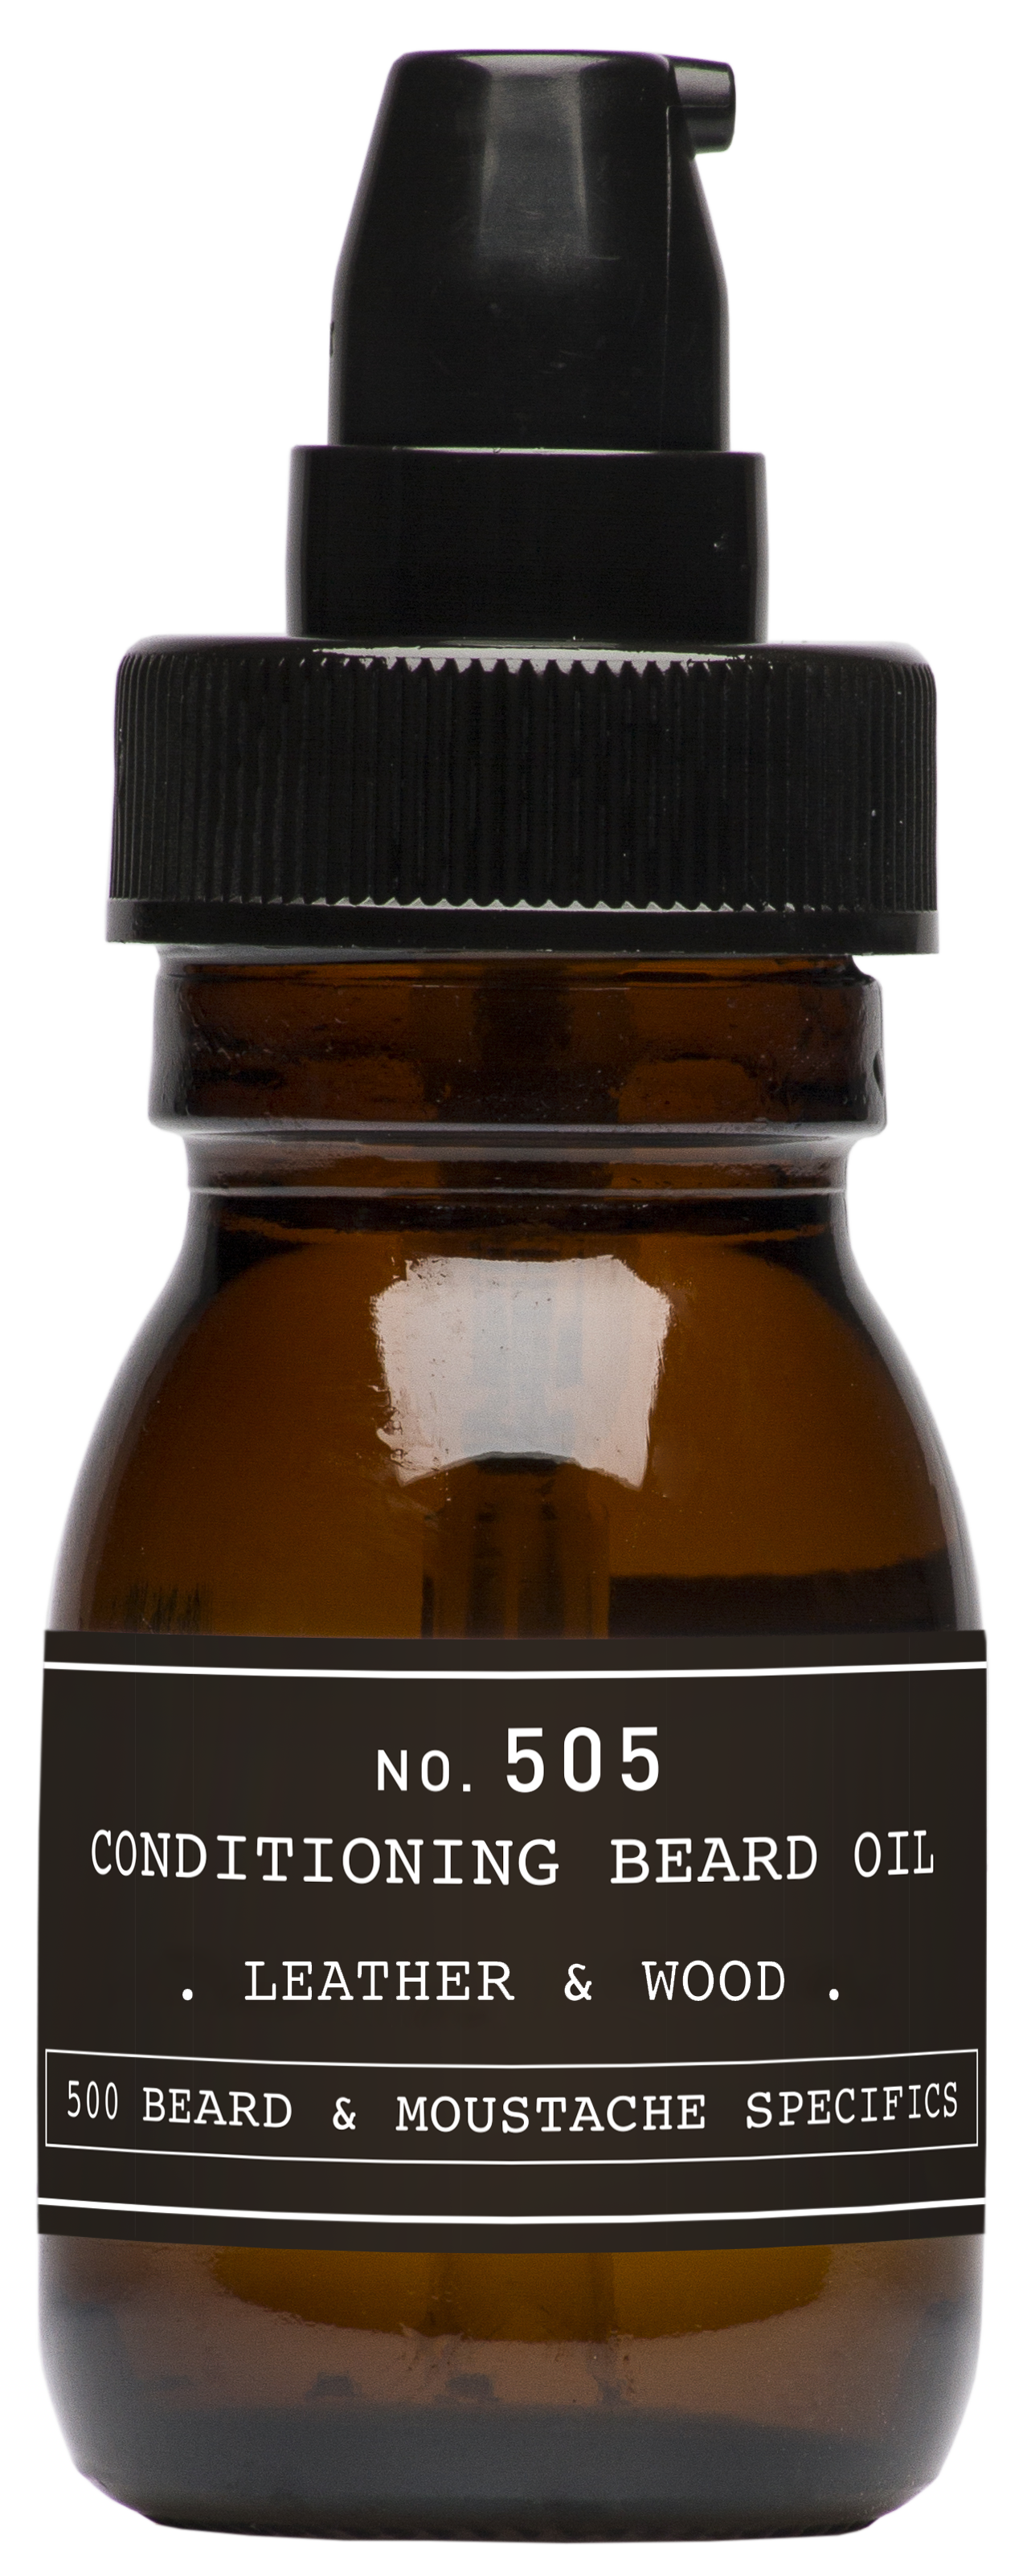 Depot - No. 505 Conditioning Beard Oil - Leather&Wood